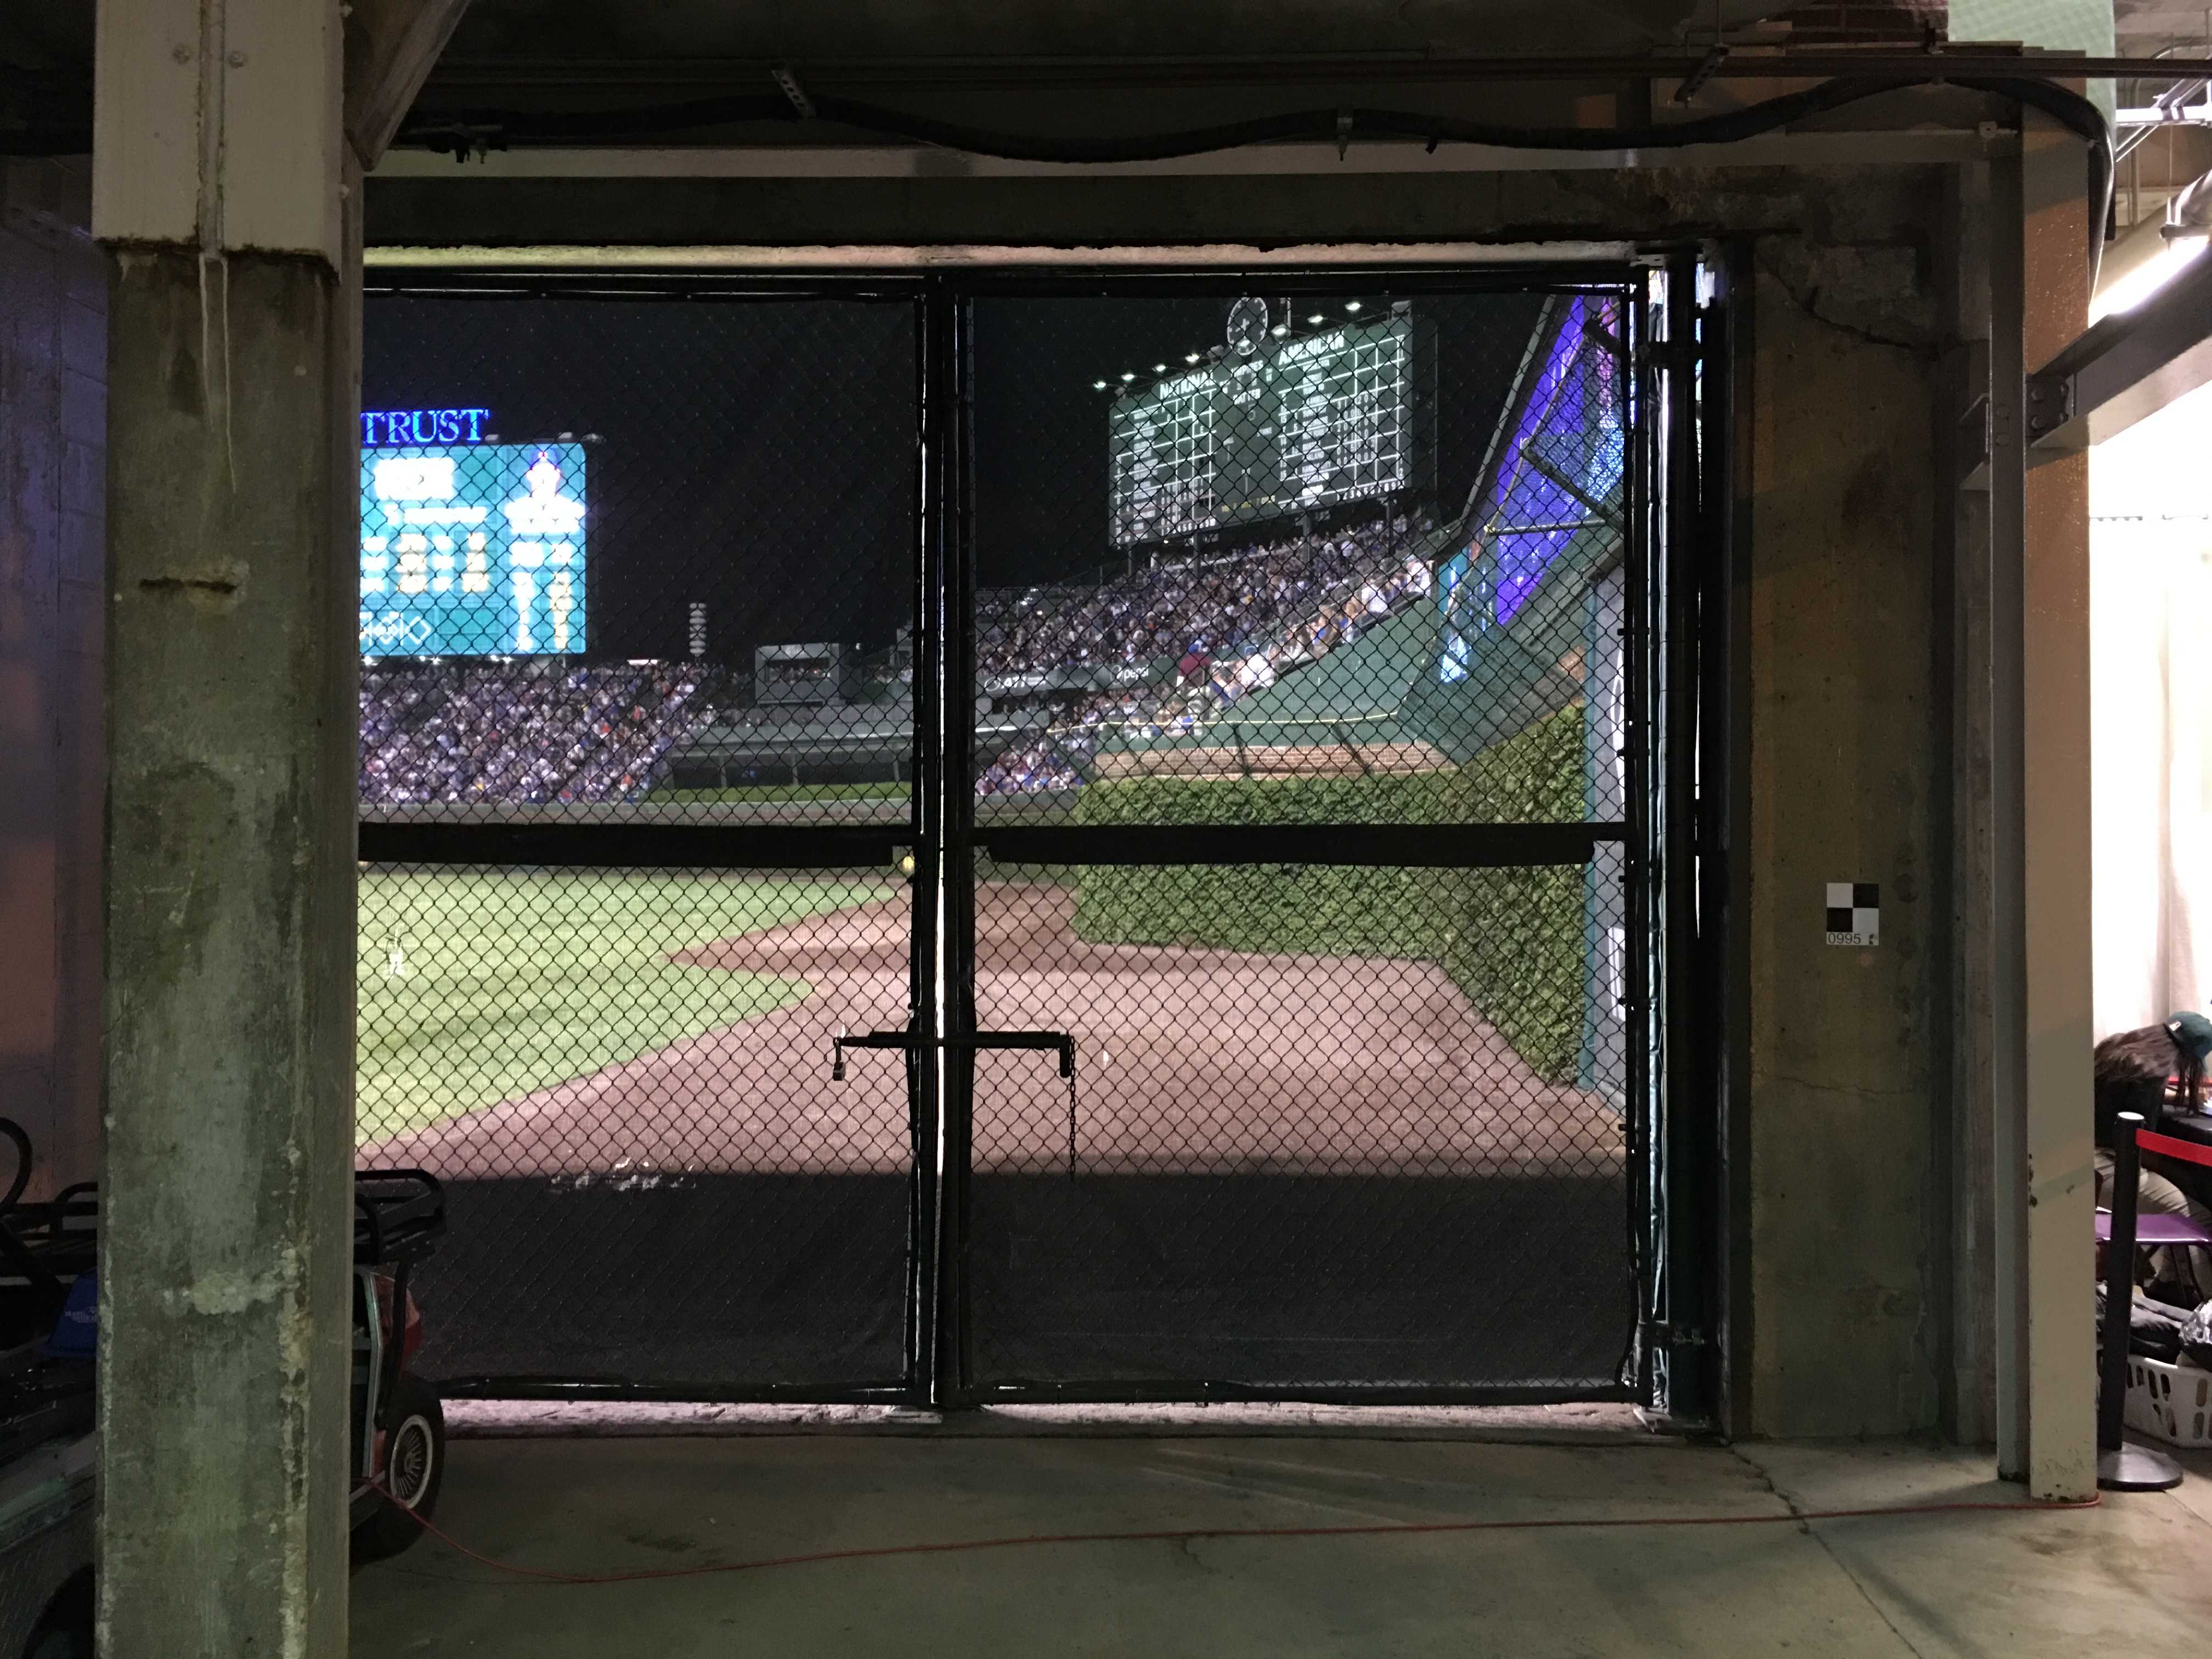 Looking through a chain-link door onto the green grass at Wrigley Field, a baseball stadium filled with people during a game.